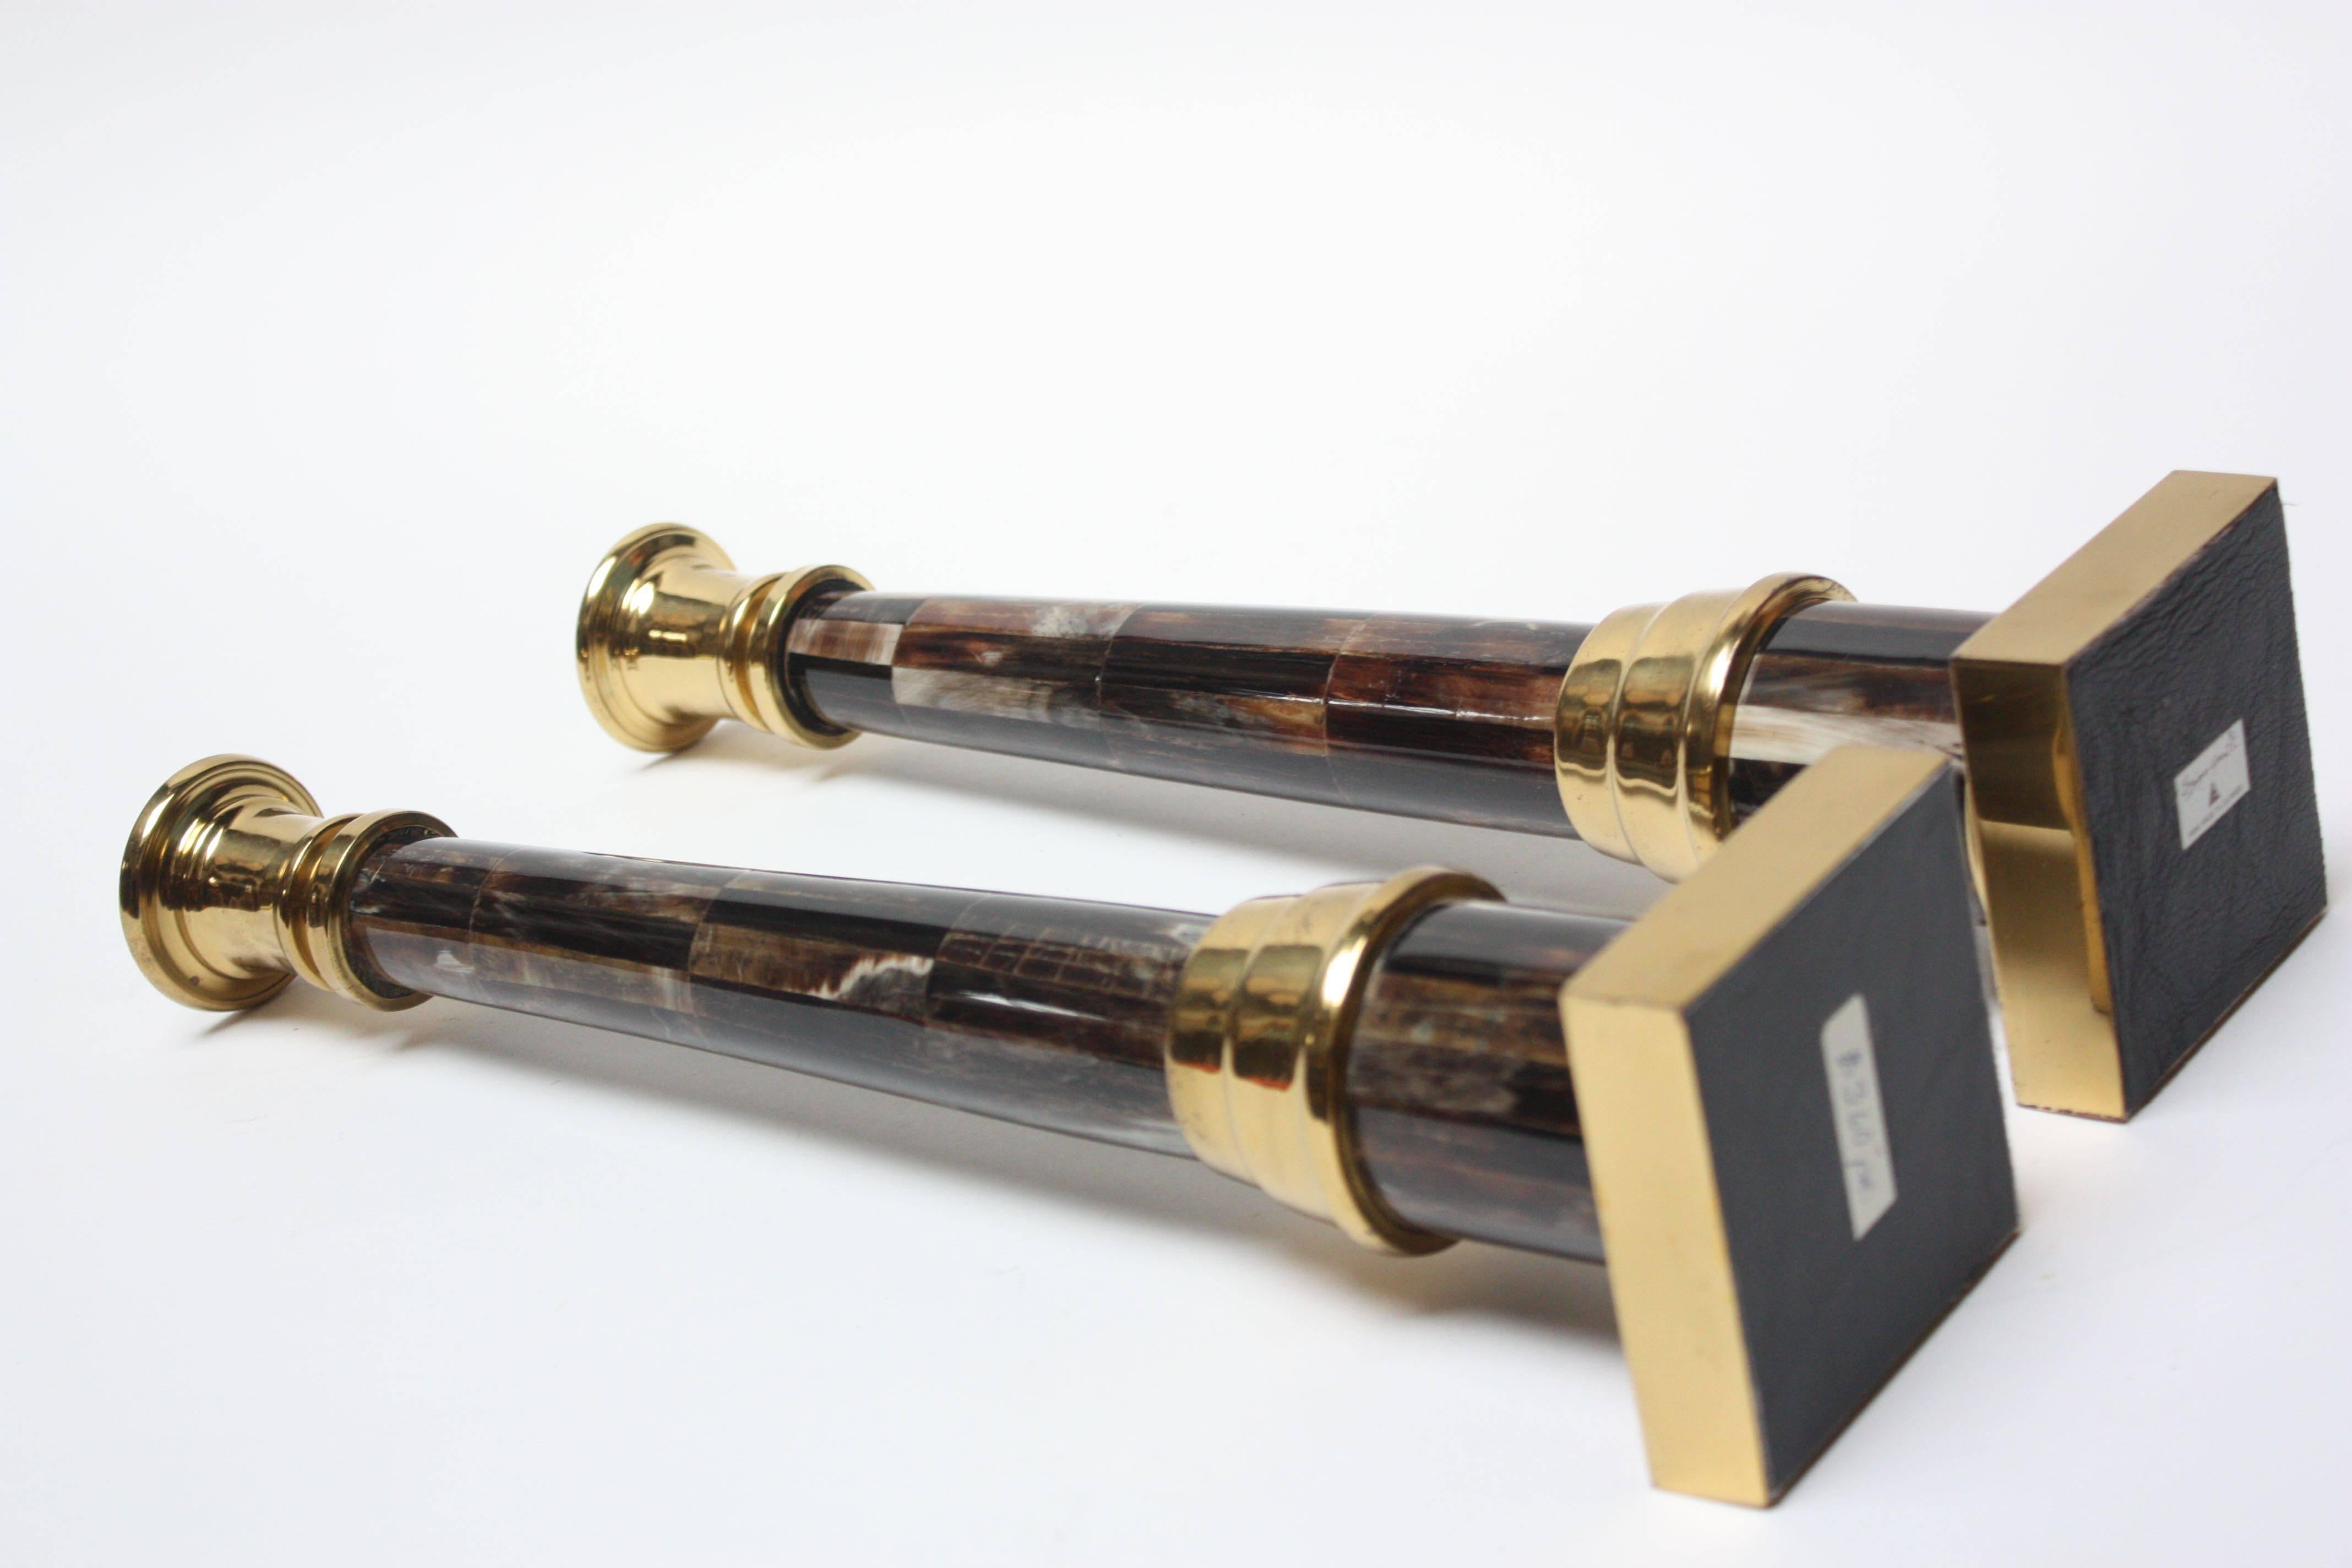 Hollywood Regency Pair of Enrique Garcel Lacquer, Resin and Brass Candlesticks